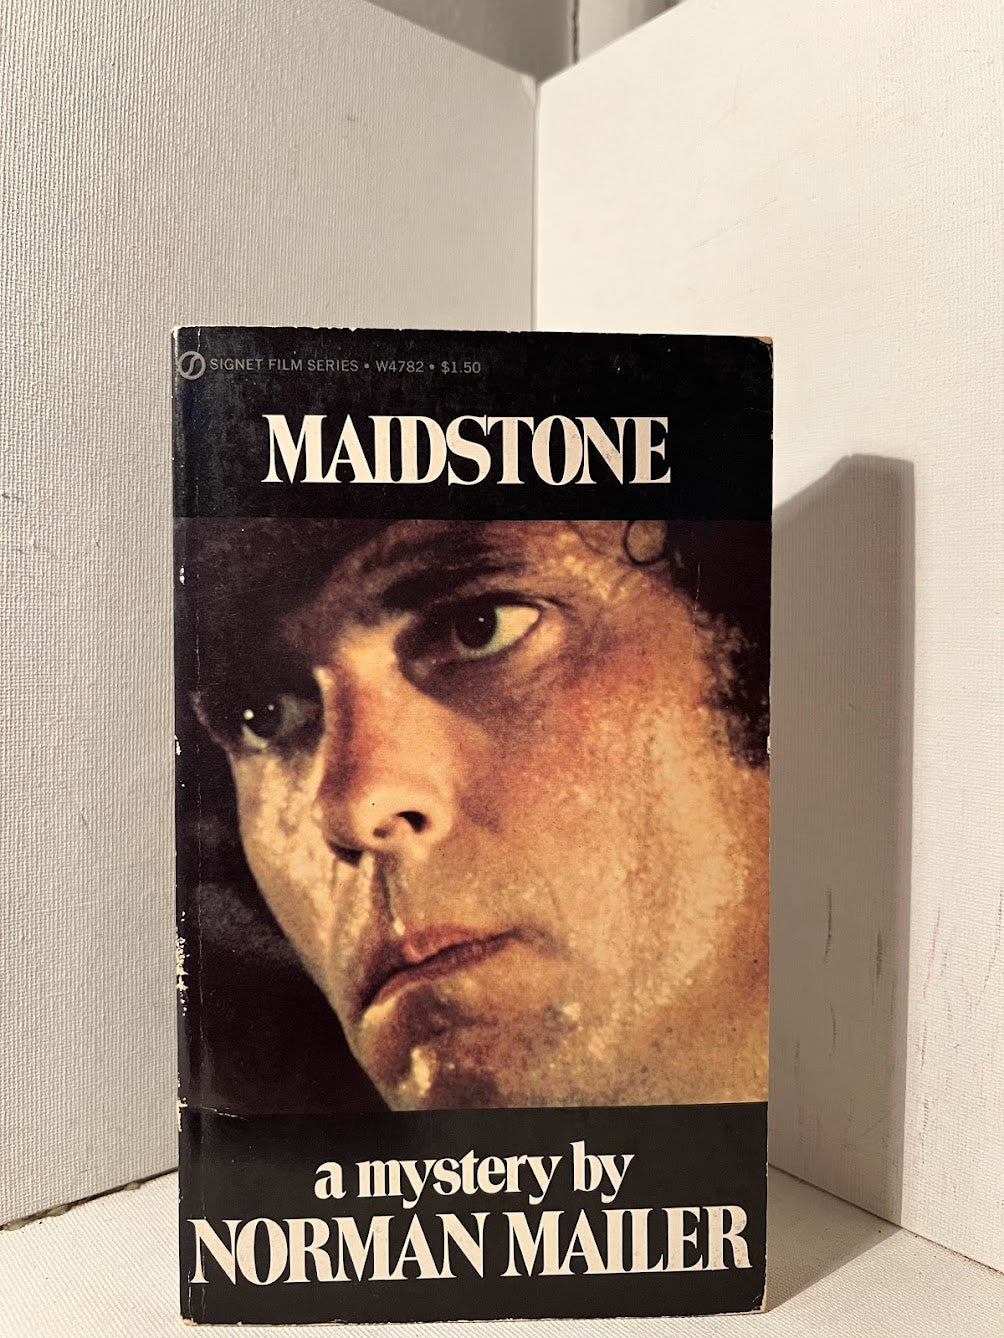 Maidstone by Norman Mailer